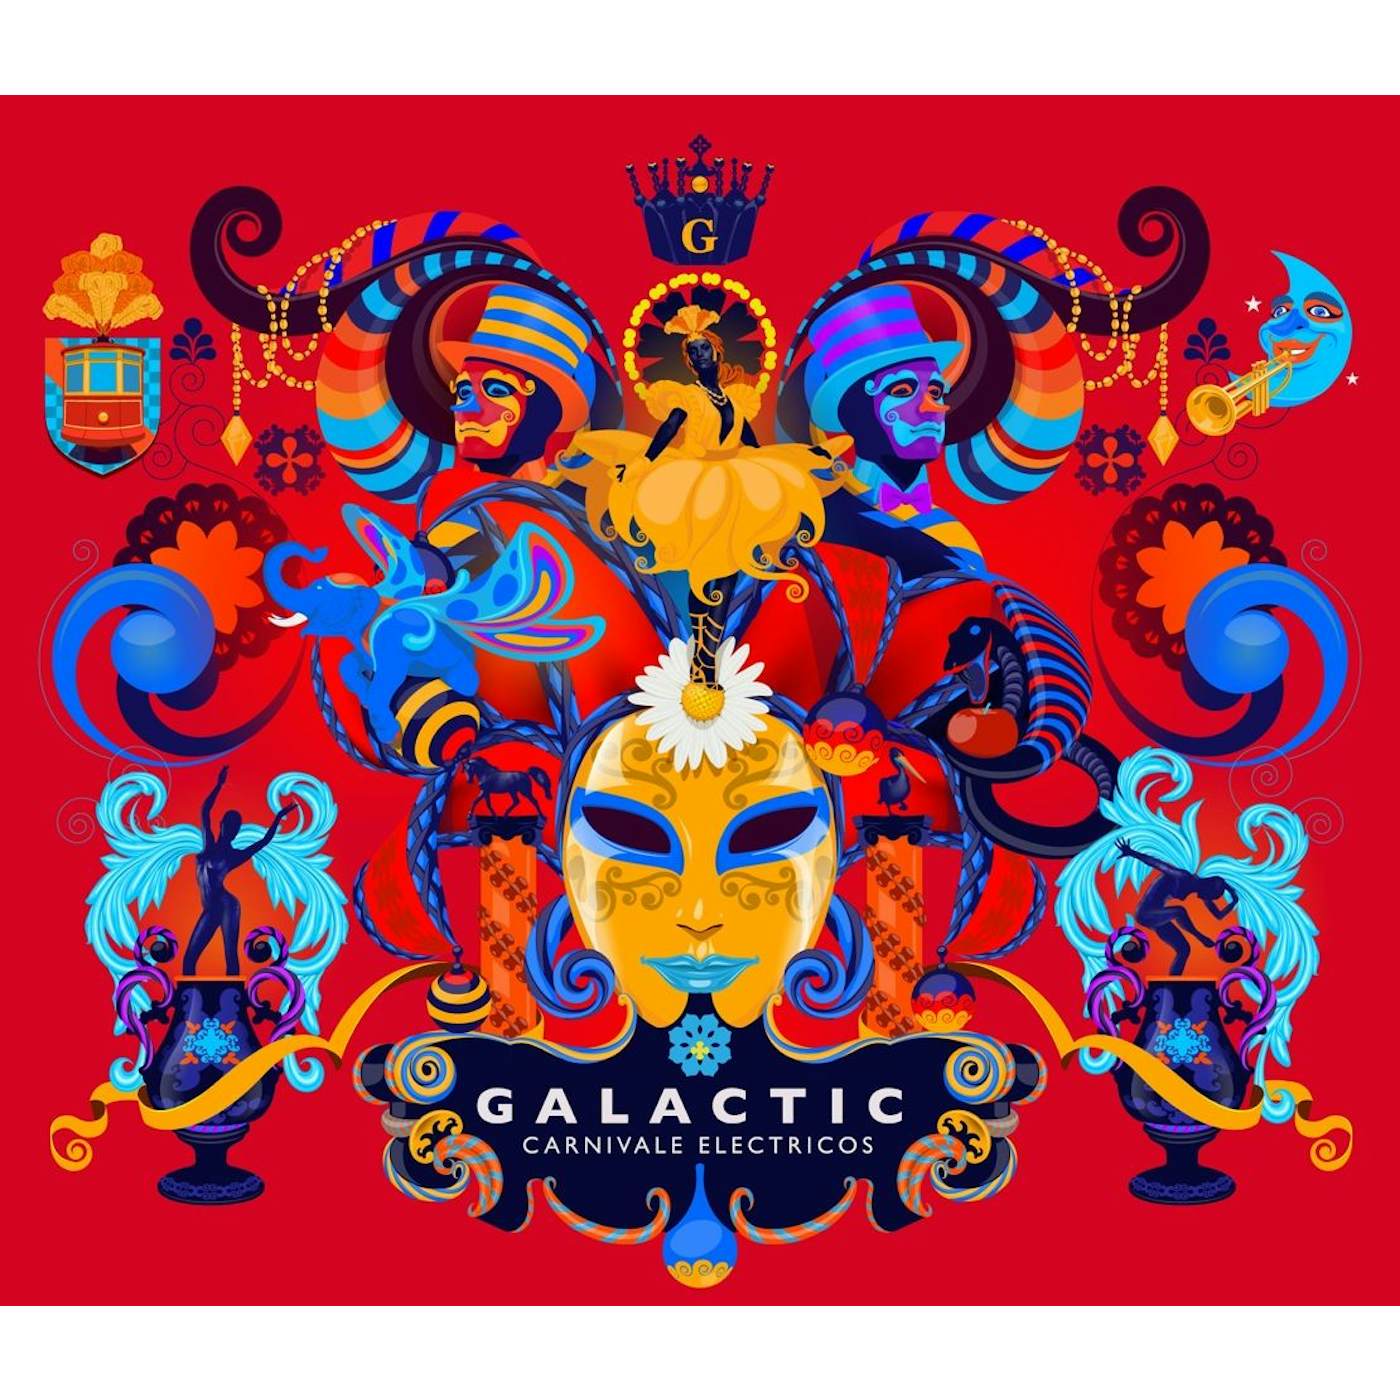 Galactic CARNIVALE ELECTRICOS CD